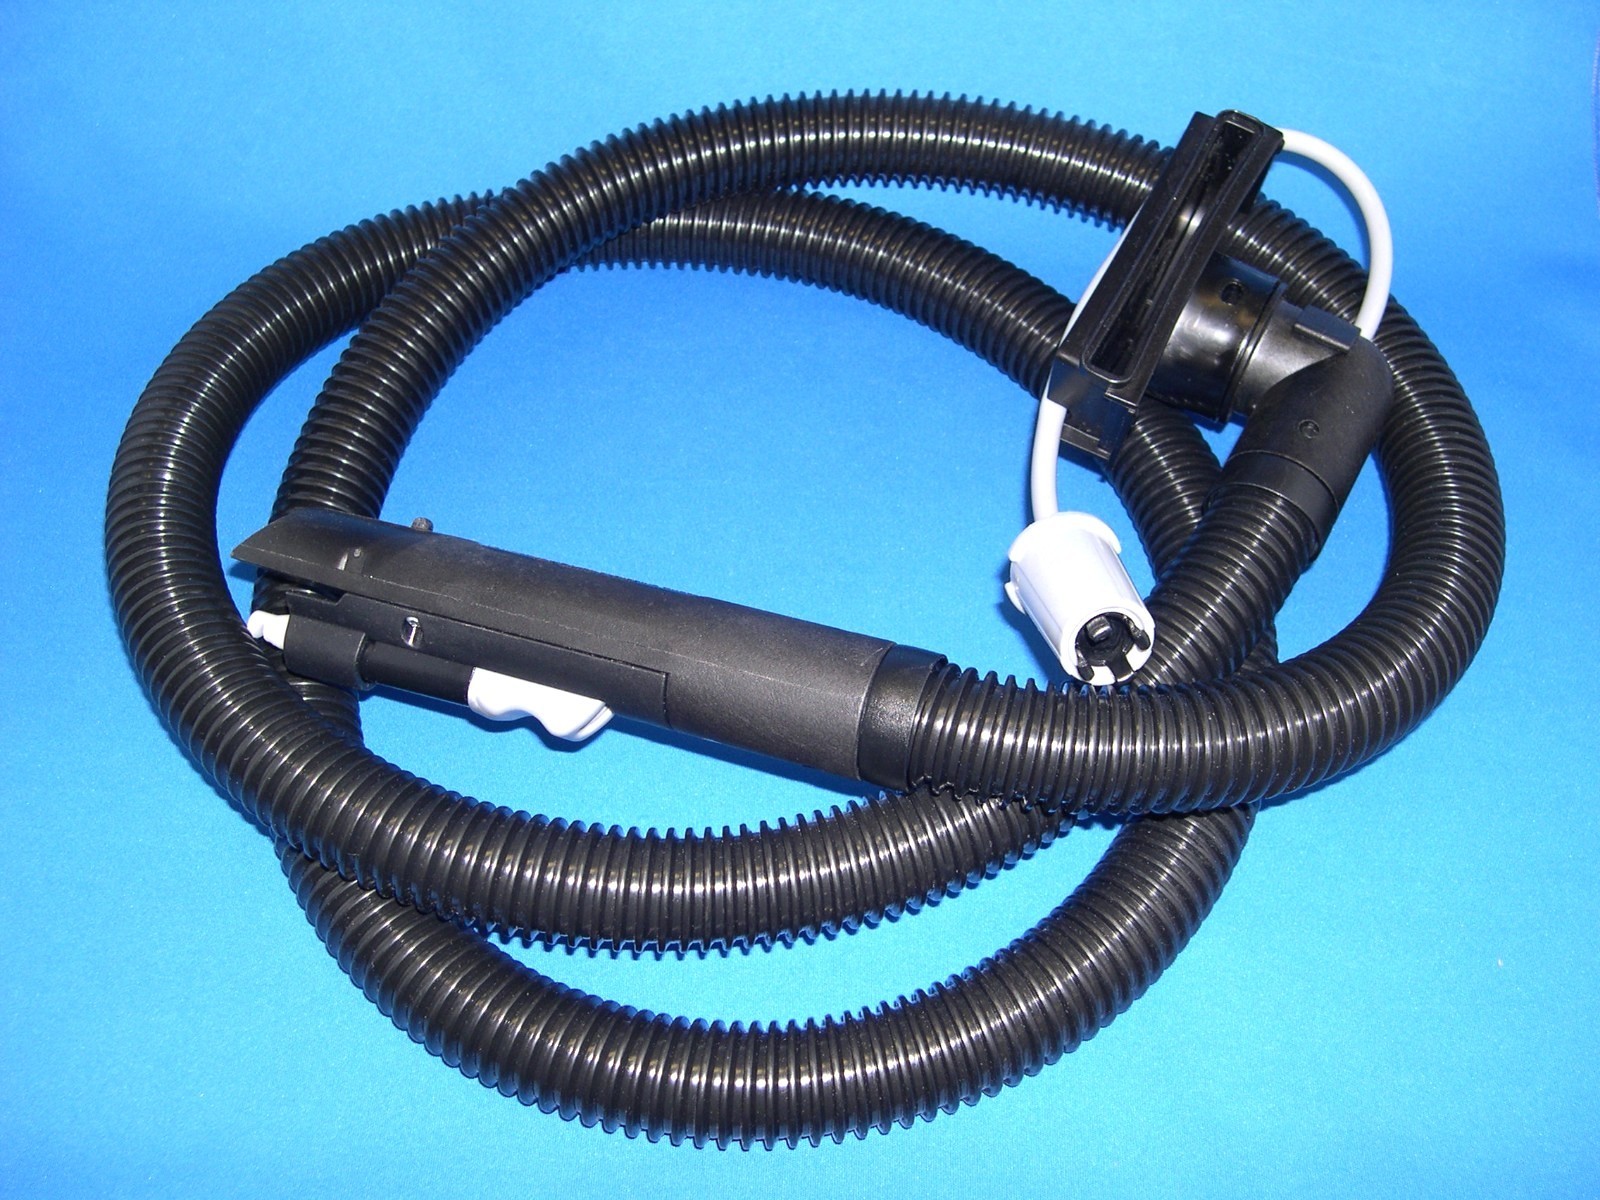 Featured image for “New Genuine Hoover Steam Vac Hose 440007181, 43491074, 304042002 or 304042001”